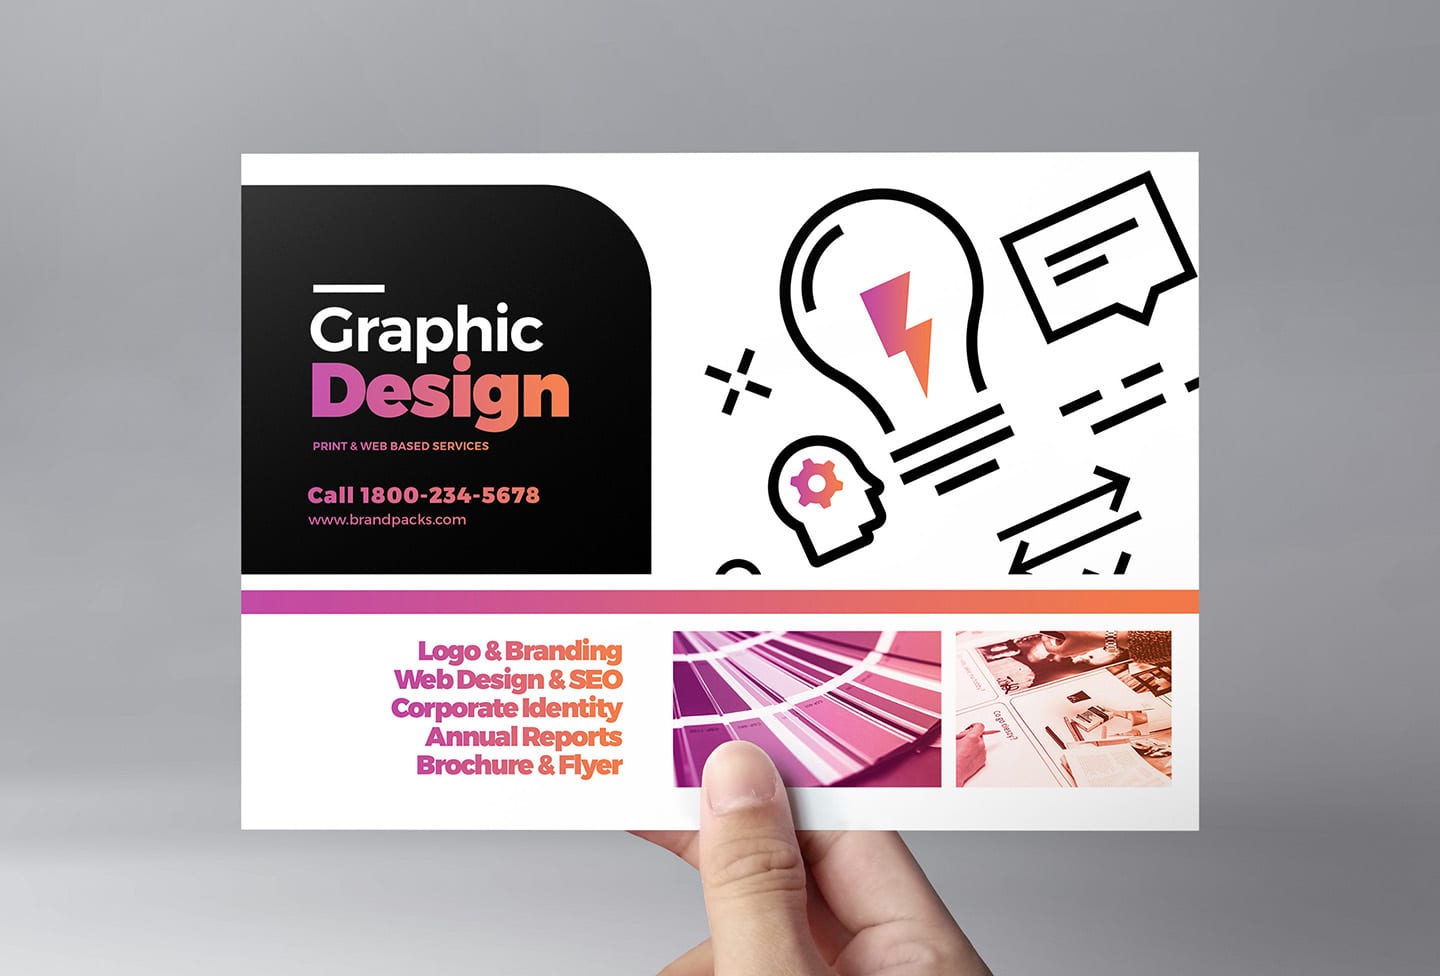 Graphic Design Agency Flyer Template For Photoshop Illustrator